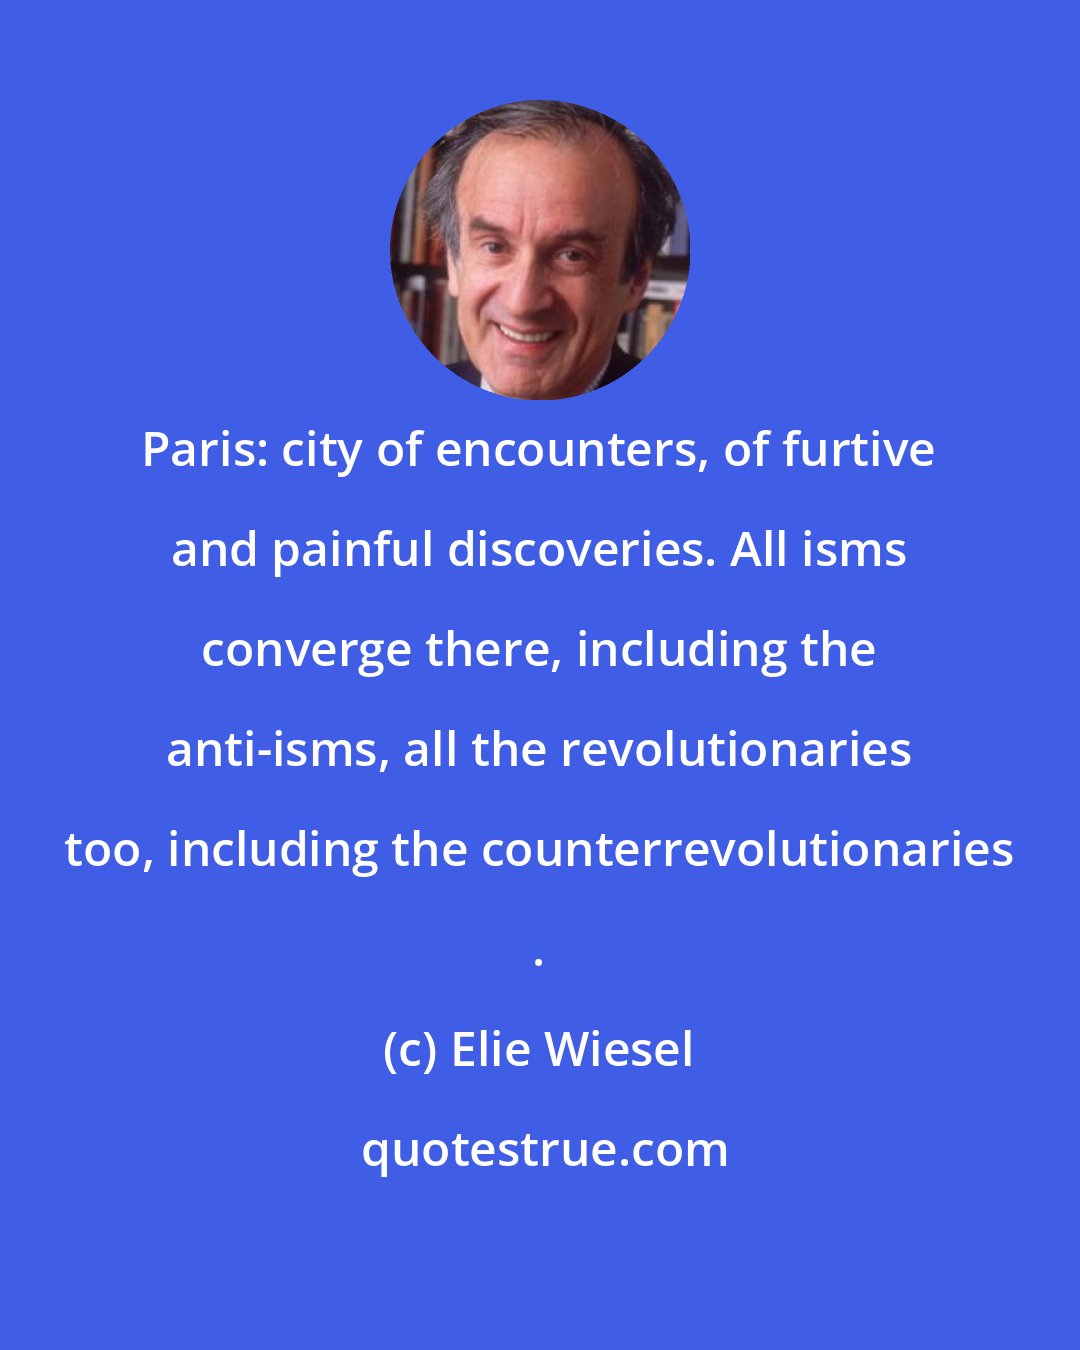 Elie Wiesel: Paris: city of encounters, of furtive and painful discoveries. All isms converge there, including the anti-isms, all the revolutionaries too, including the counterrevolutionaries .